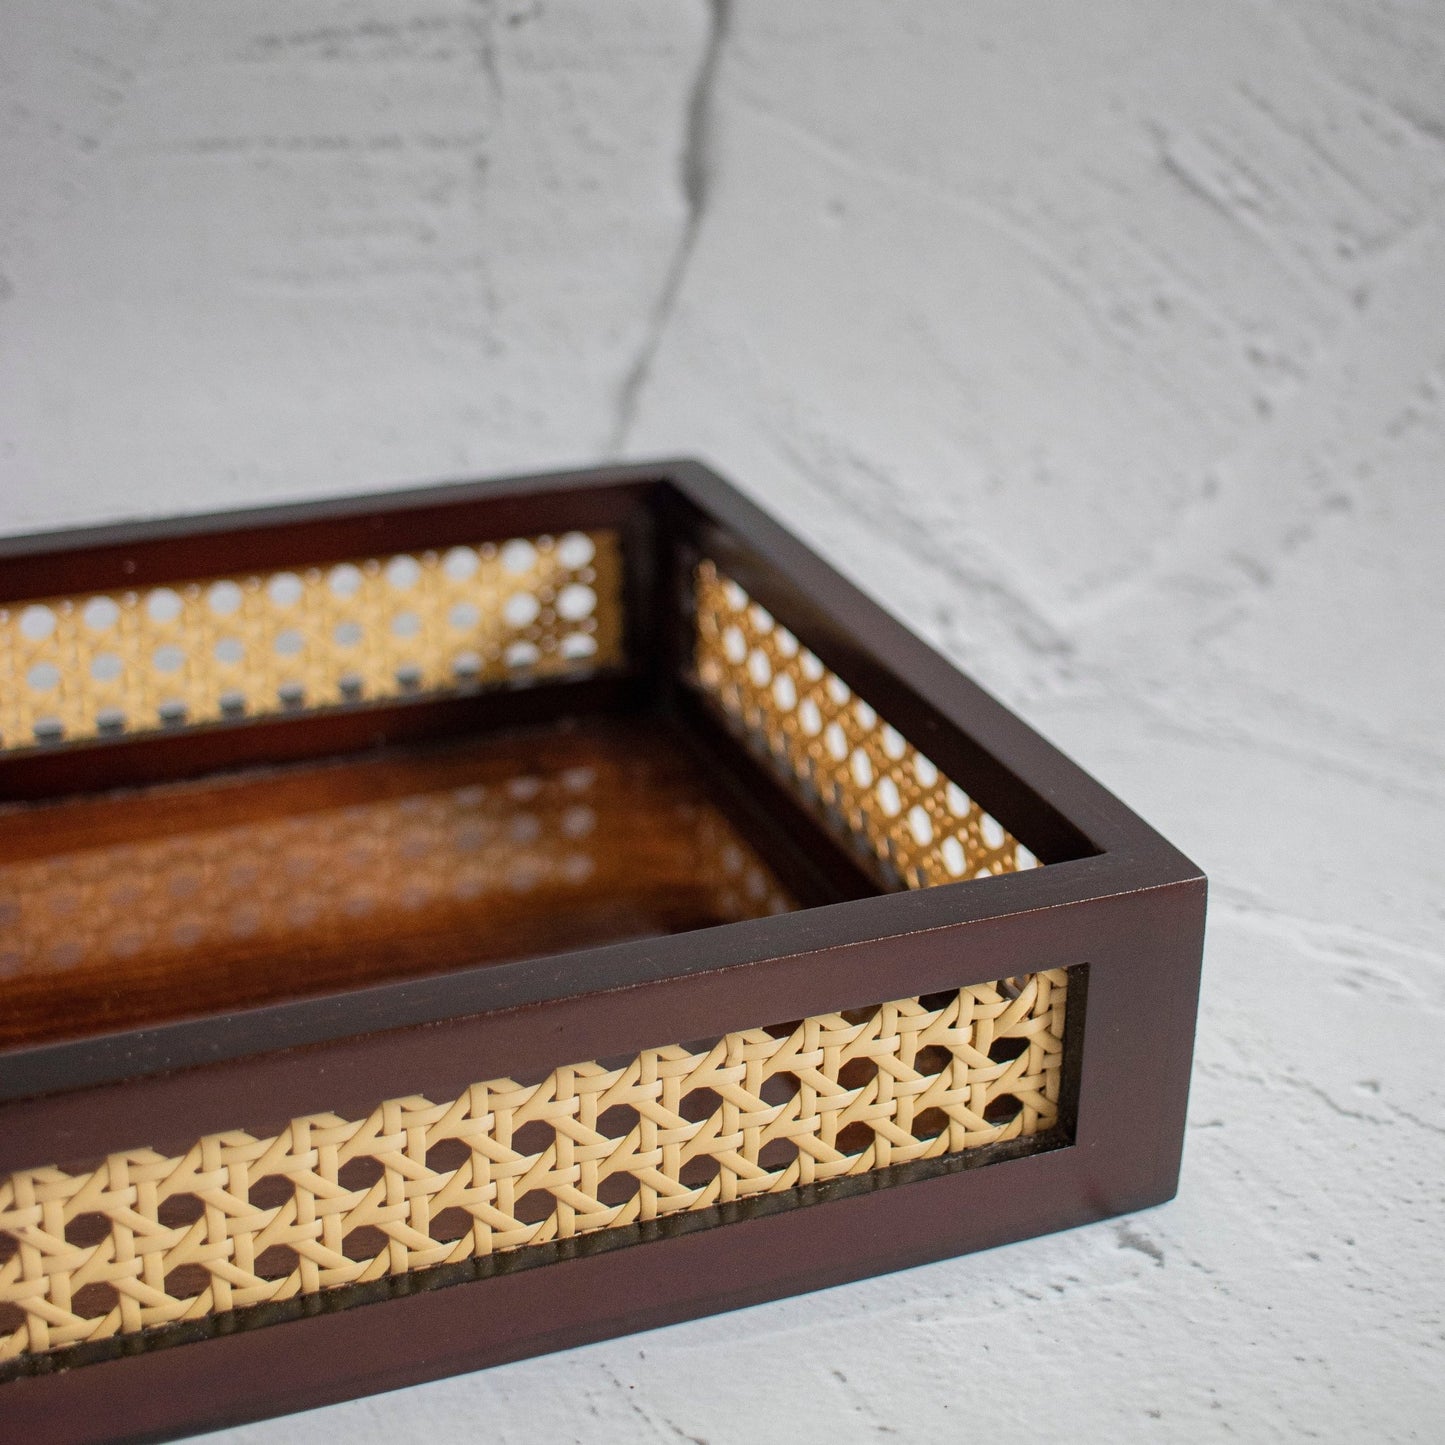 Rattan Storage and Serving tray - Ebony WoodcraftsServing Trays